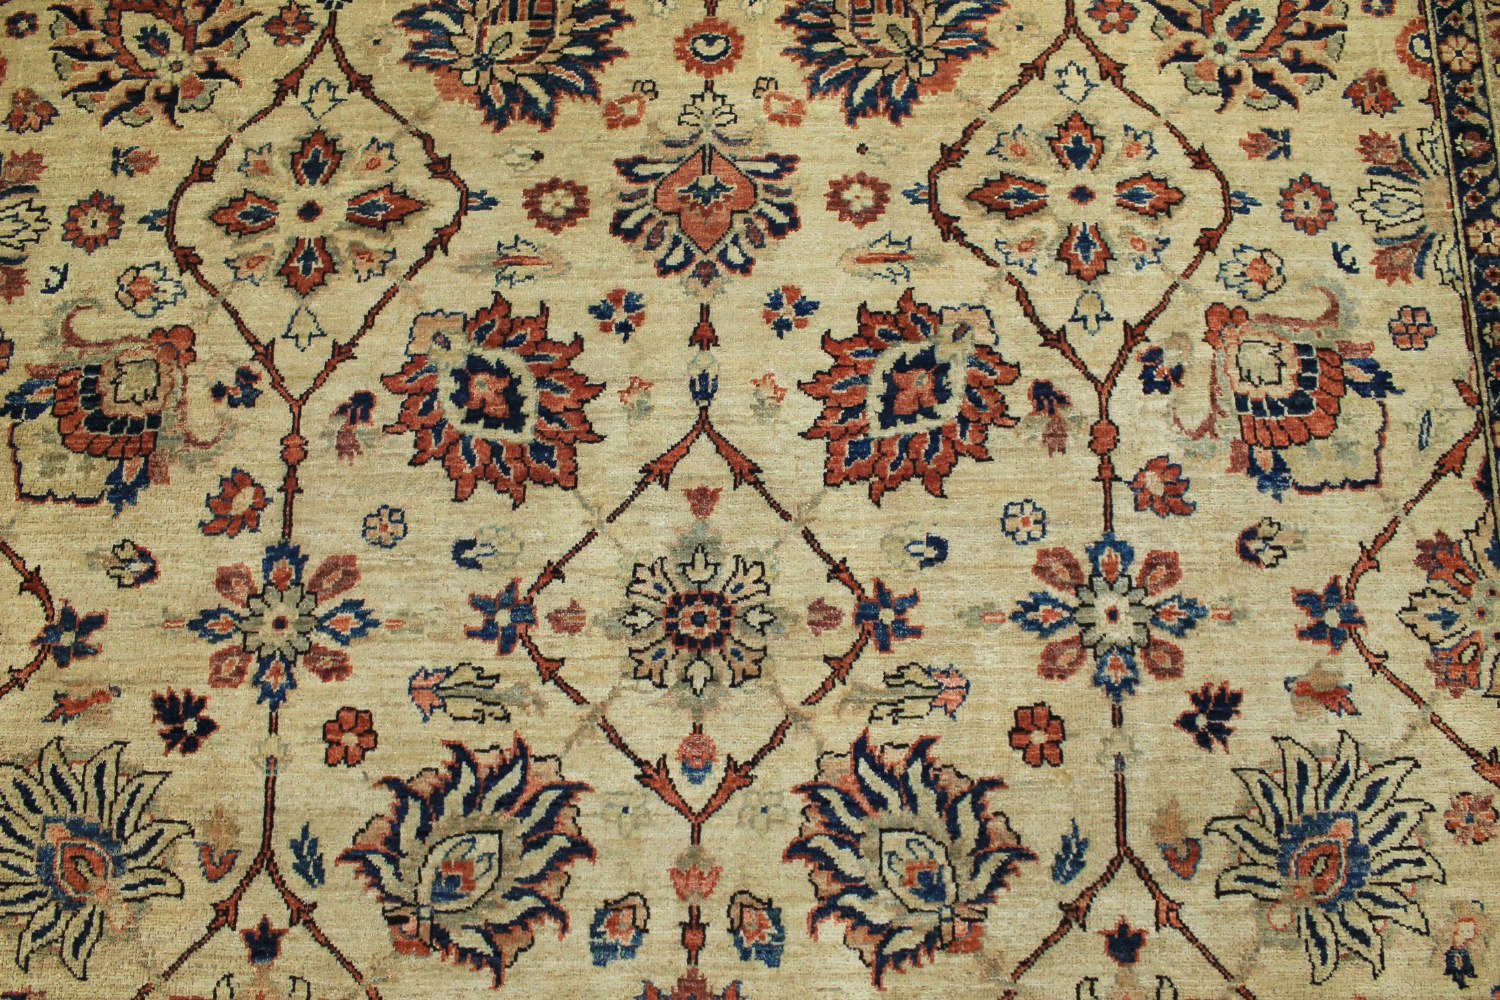 8x10 Peshawar Hand Knotted Wool Area Rug - MR13038